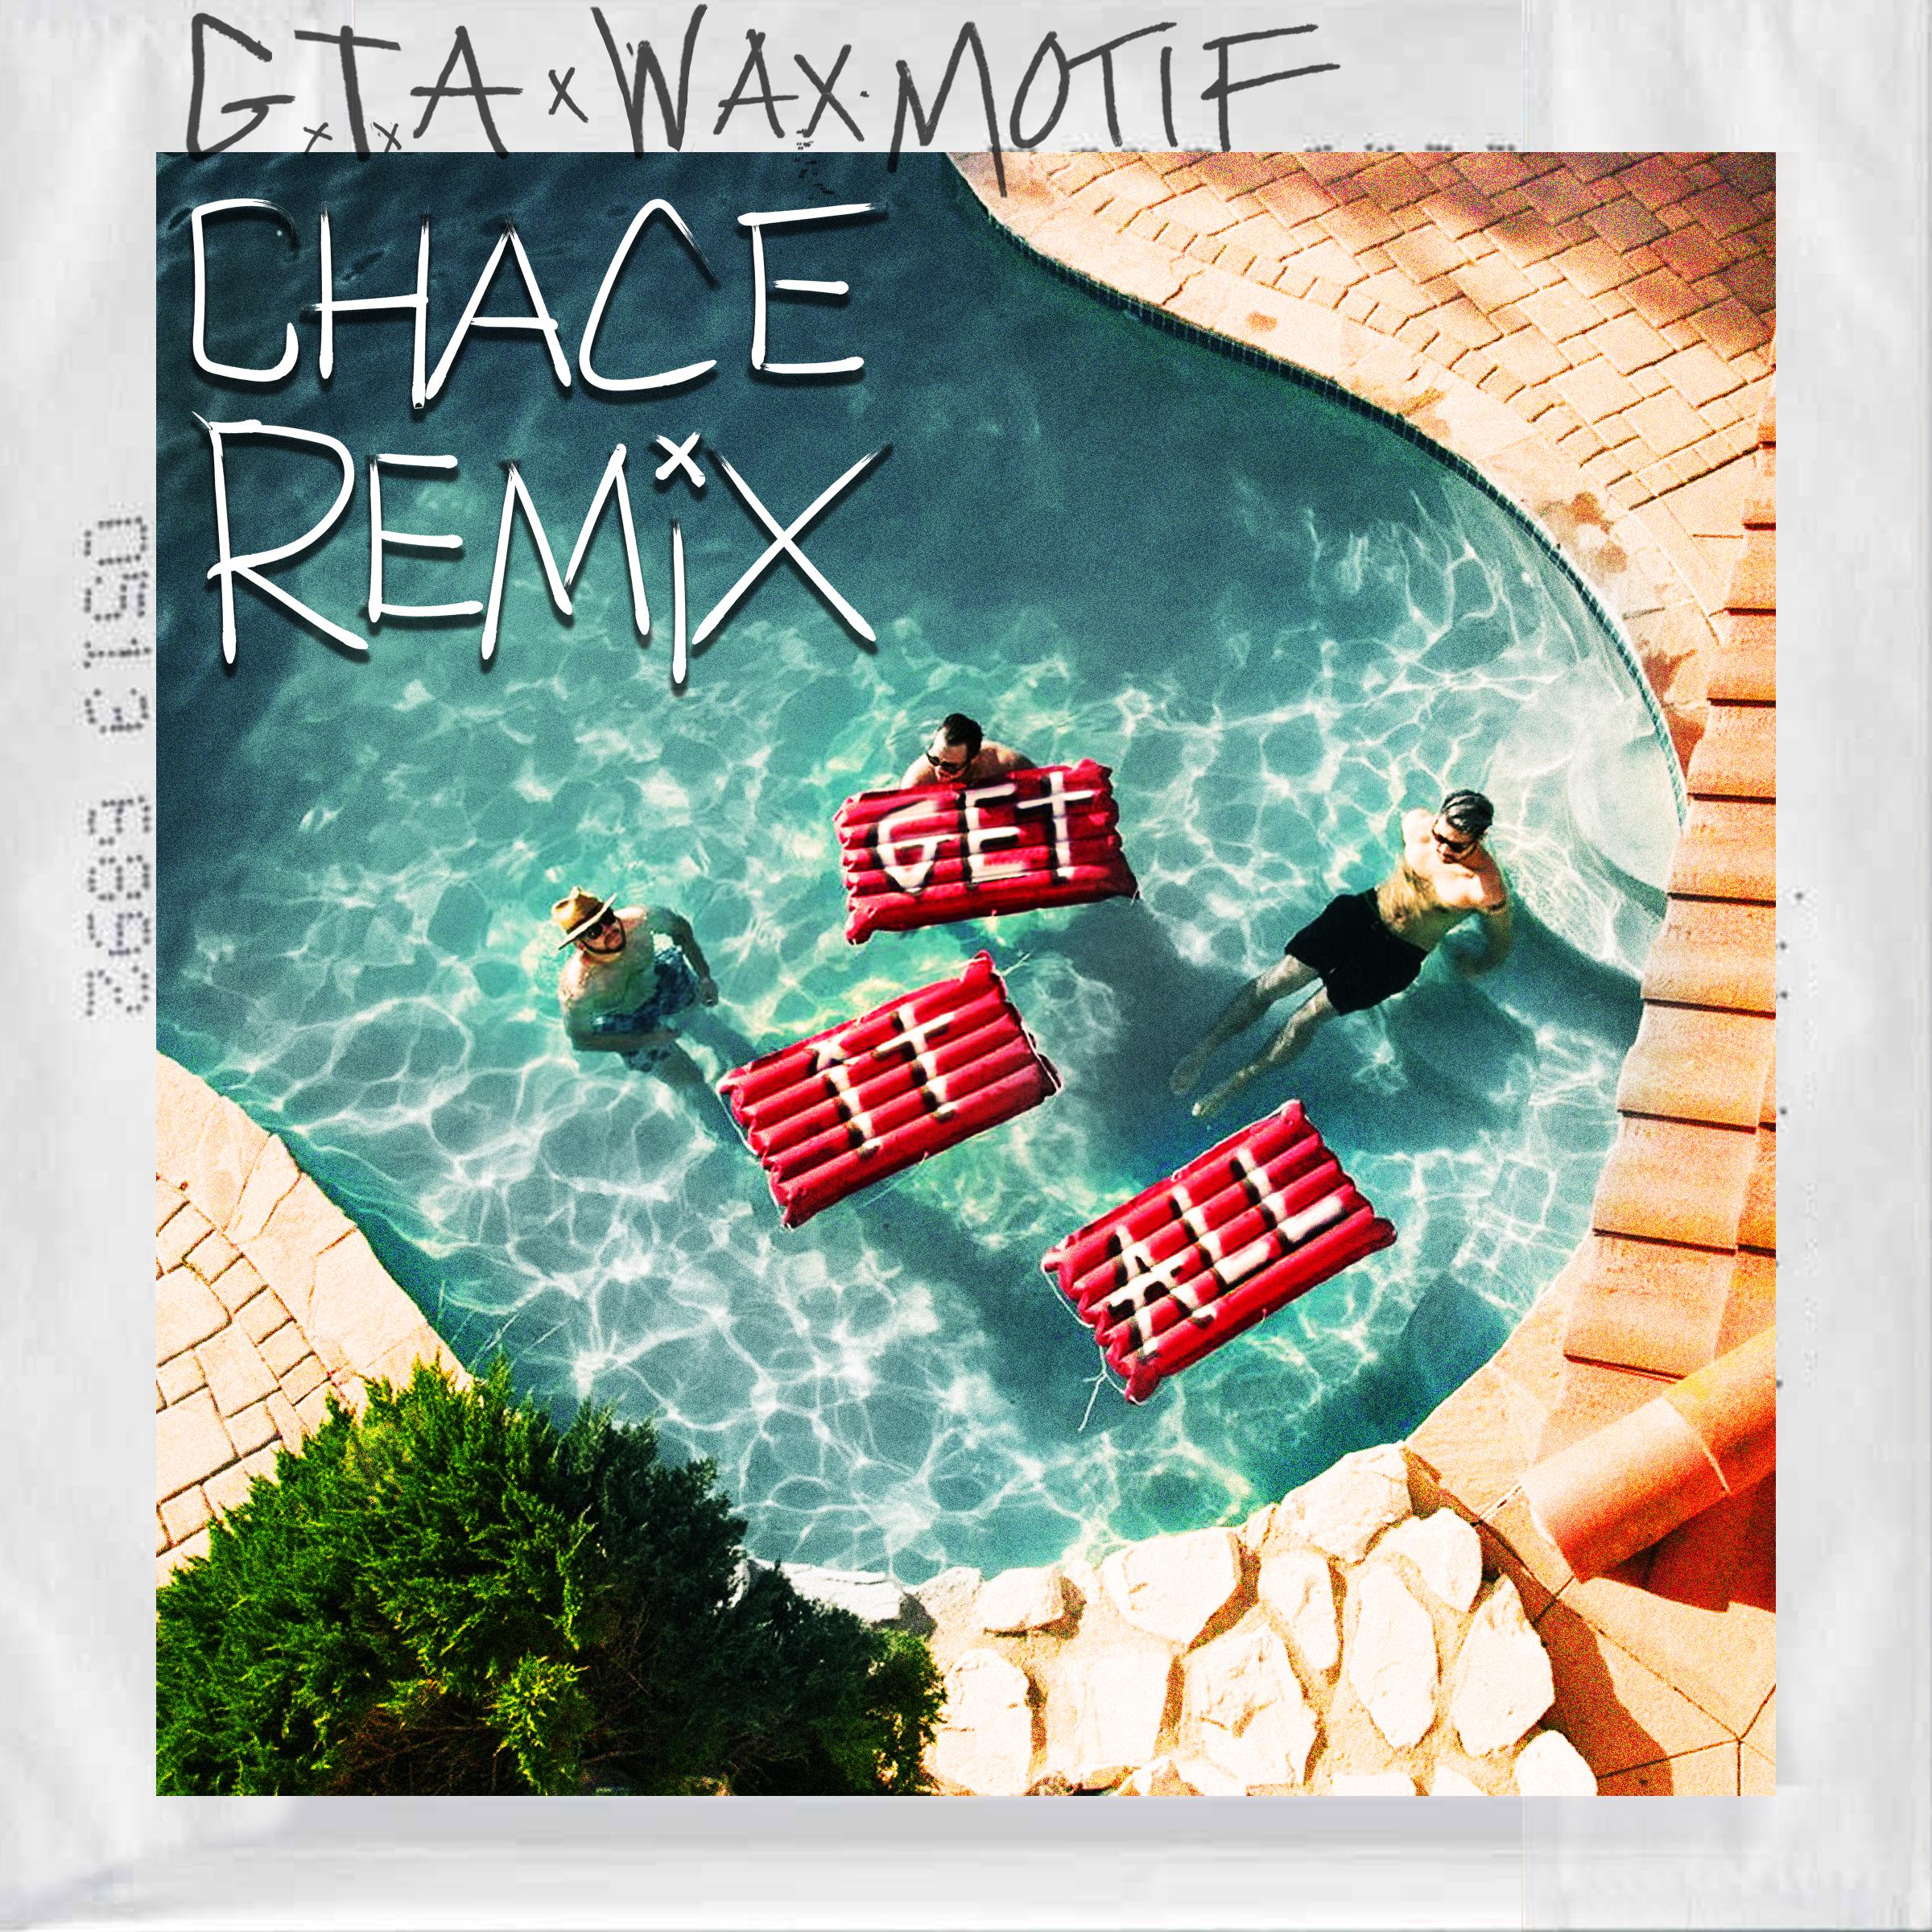 Get It All (Chace Remix)